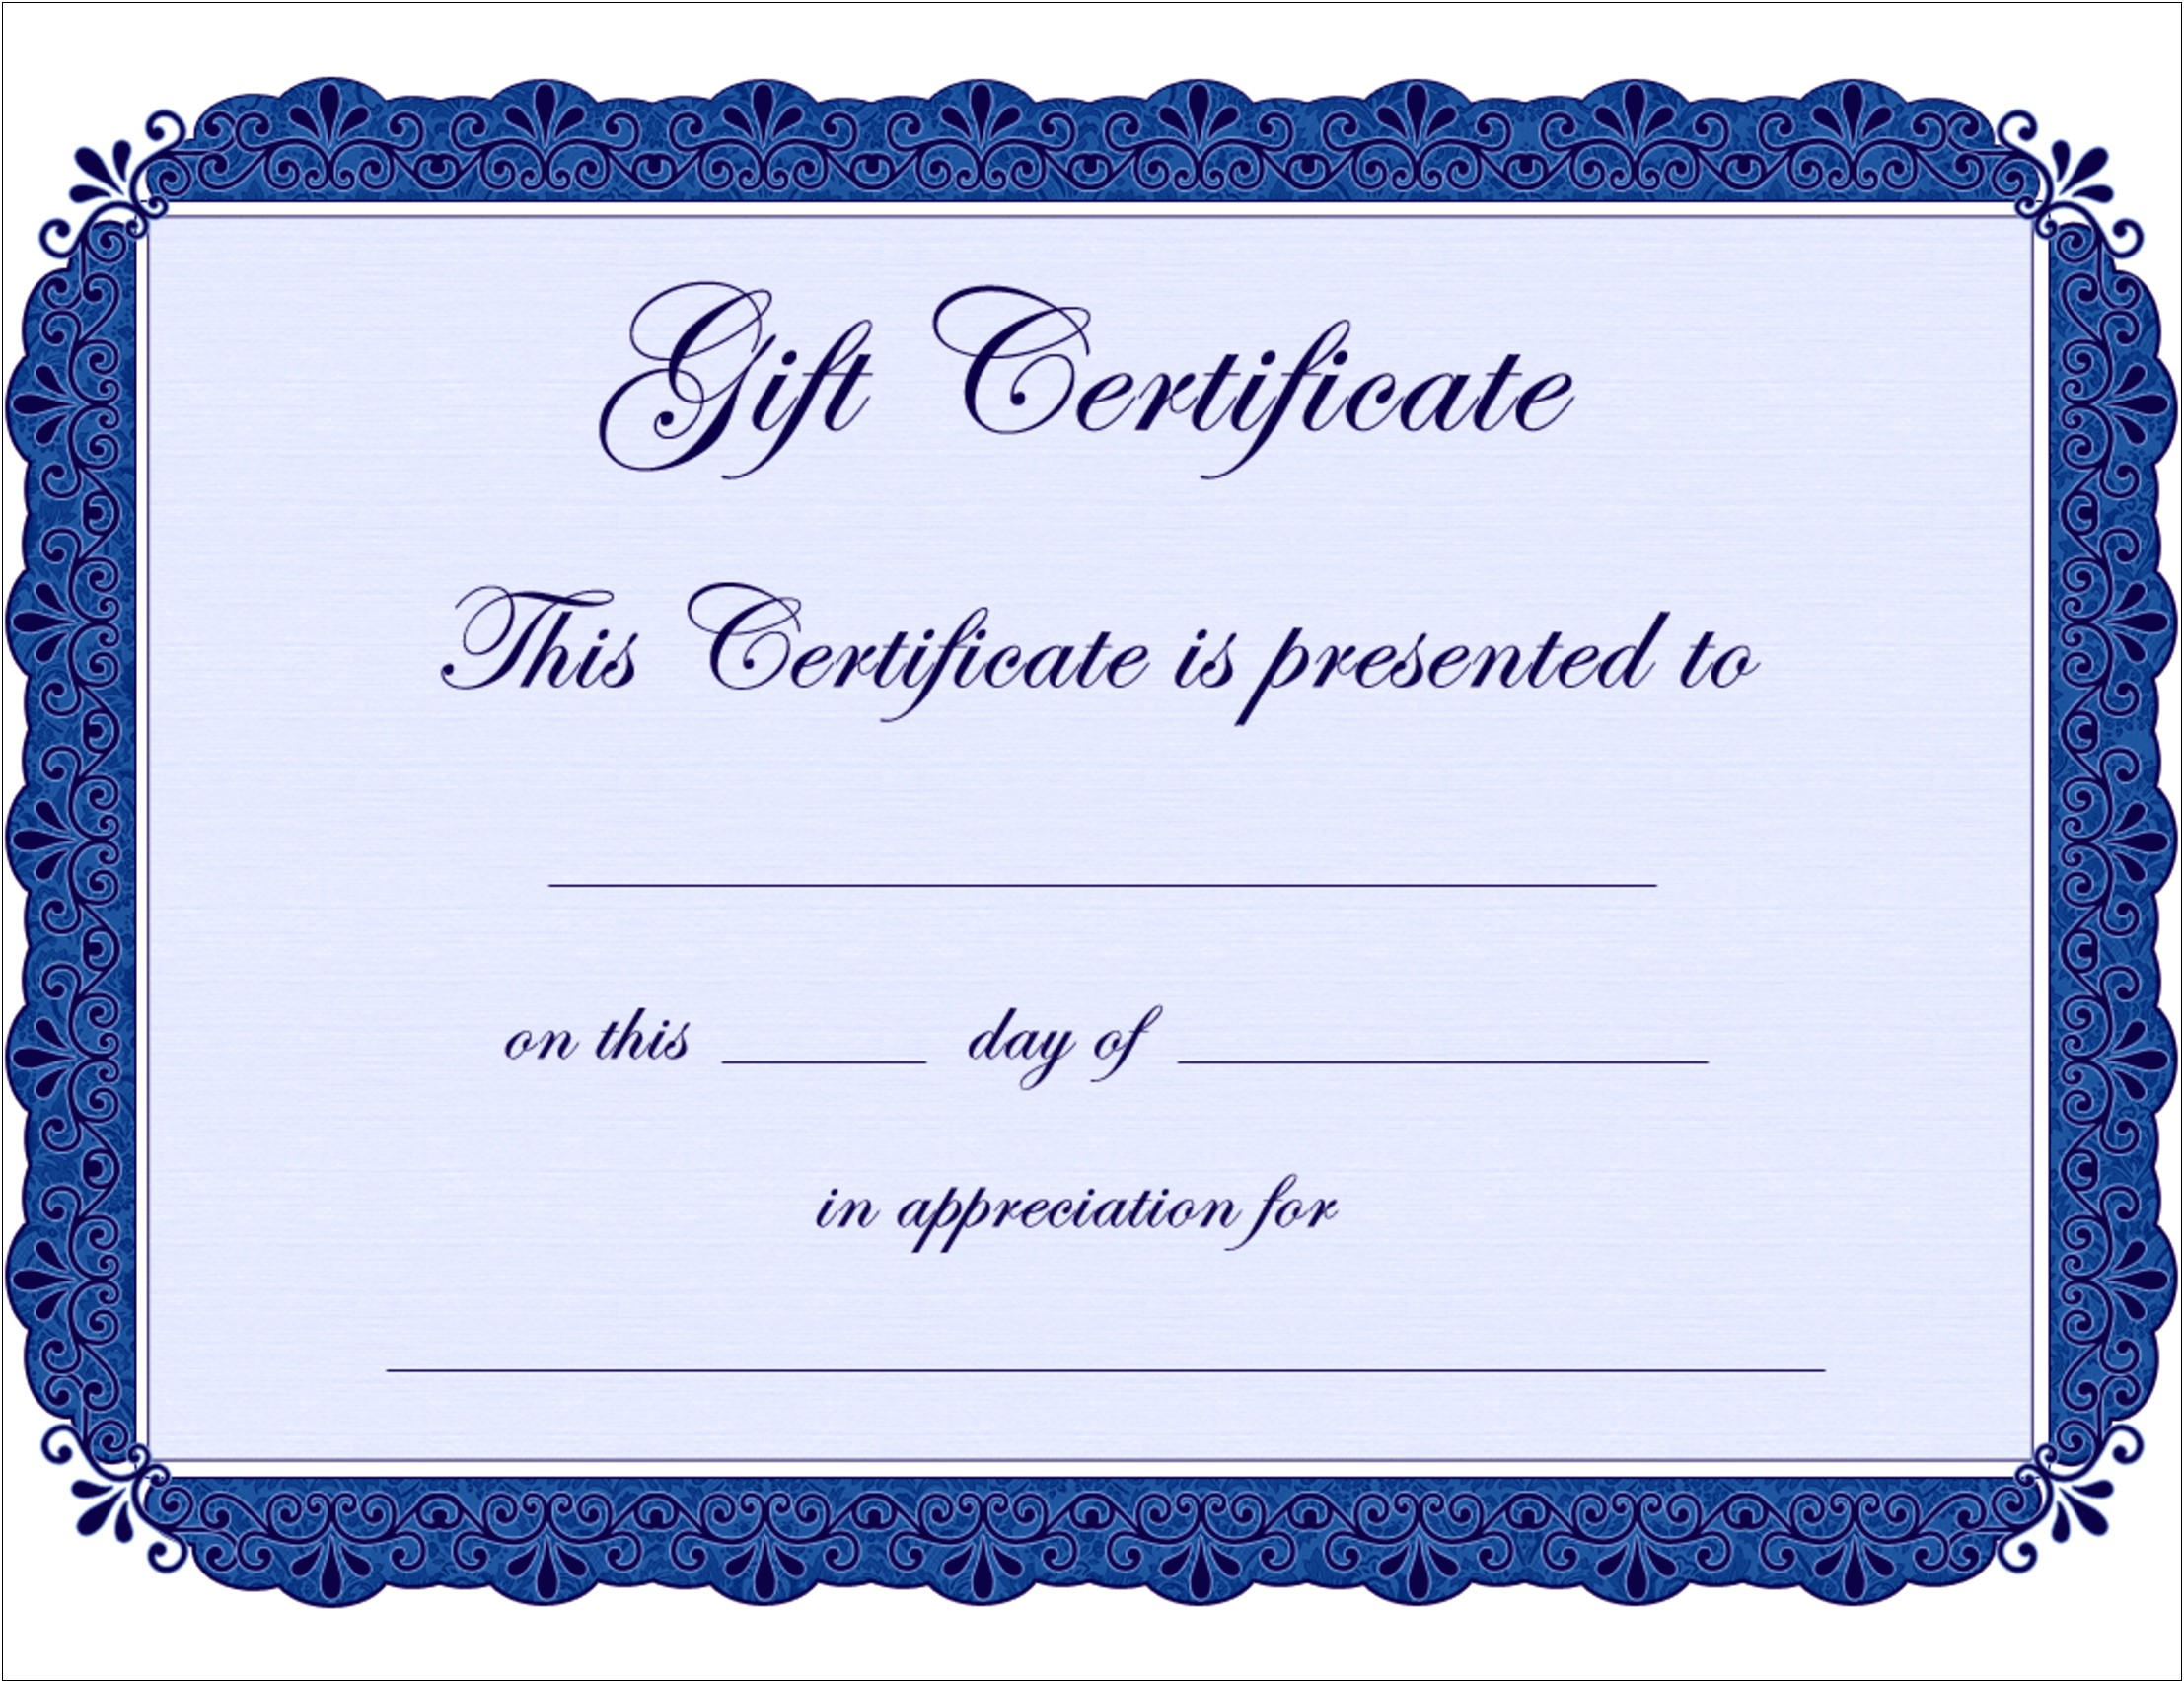 Gift Certificate Gift Certificate Template Word